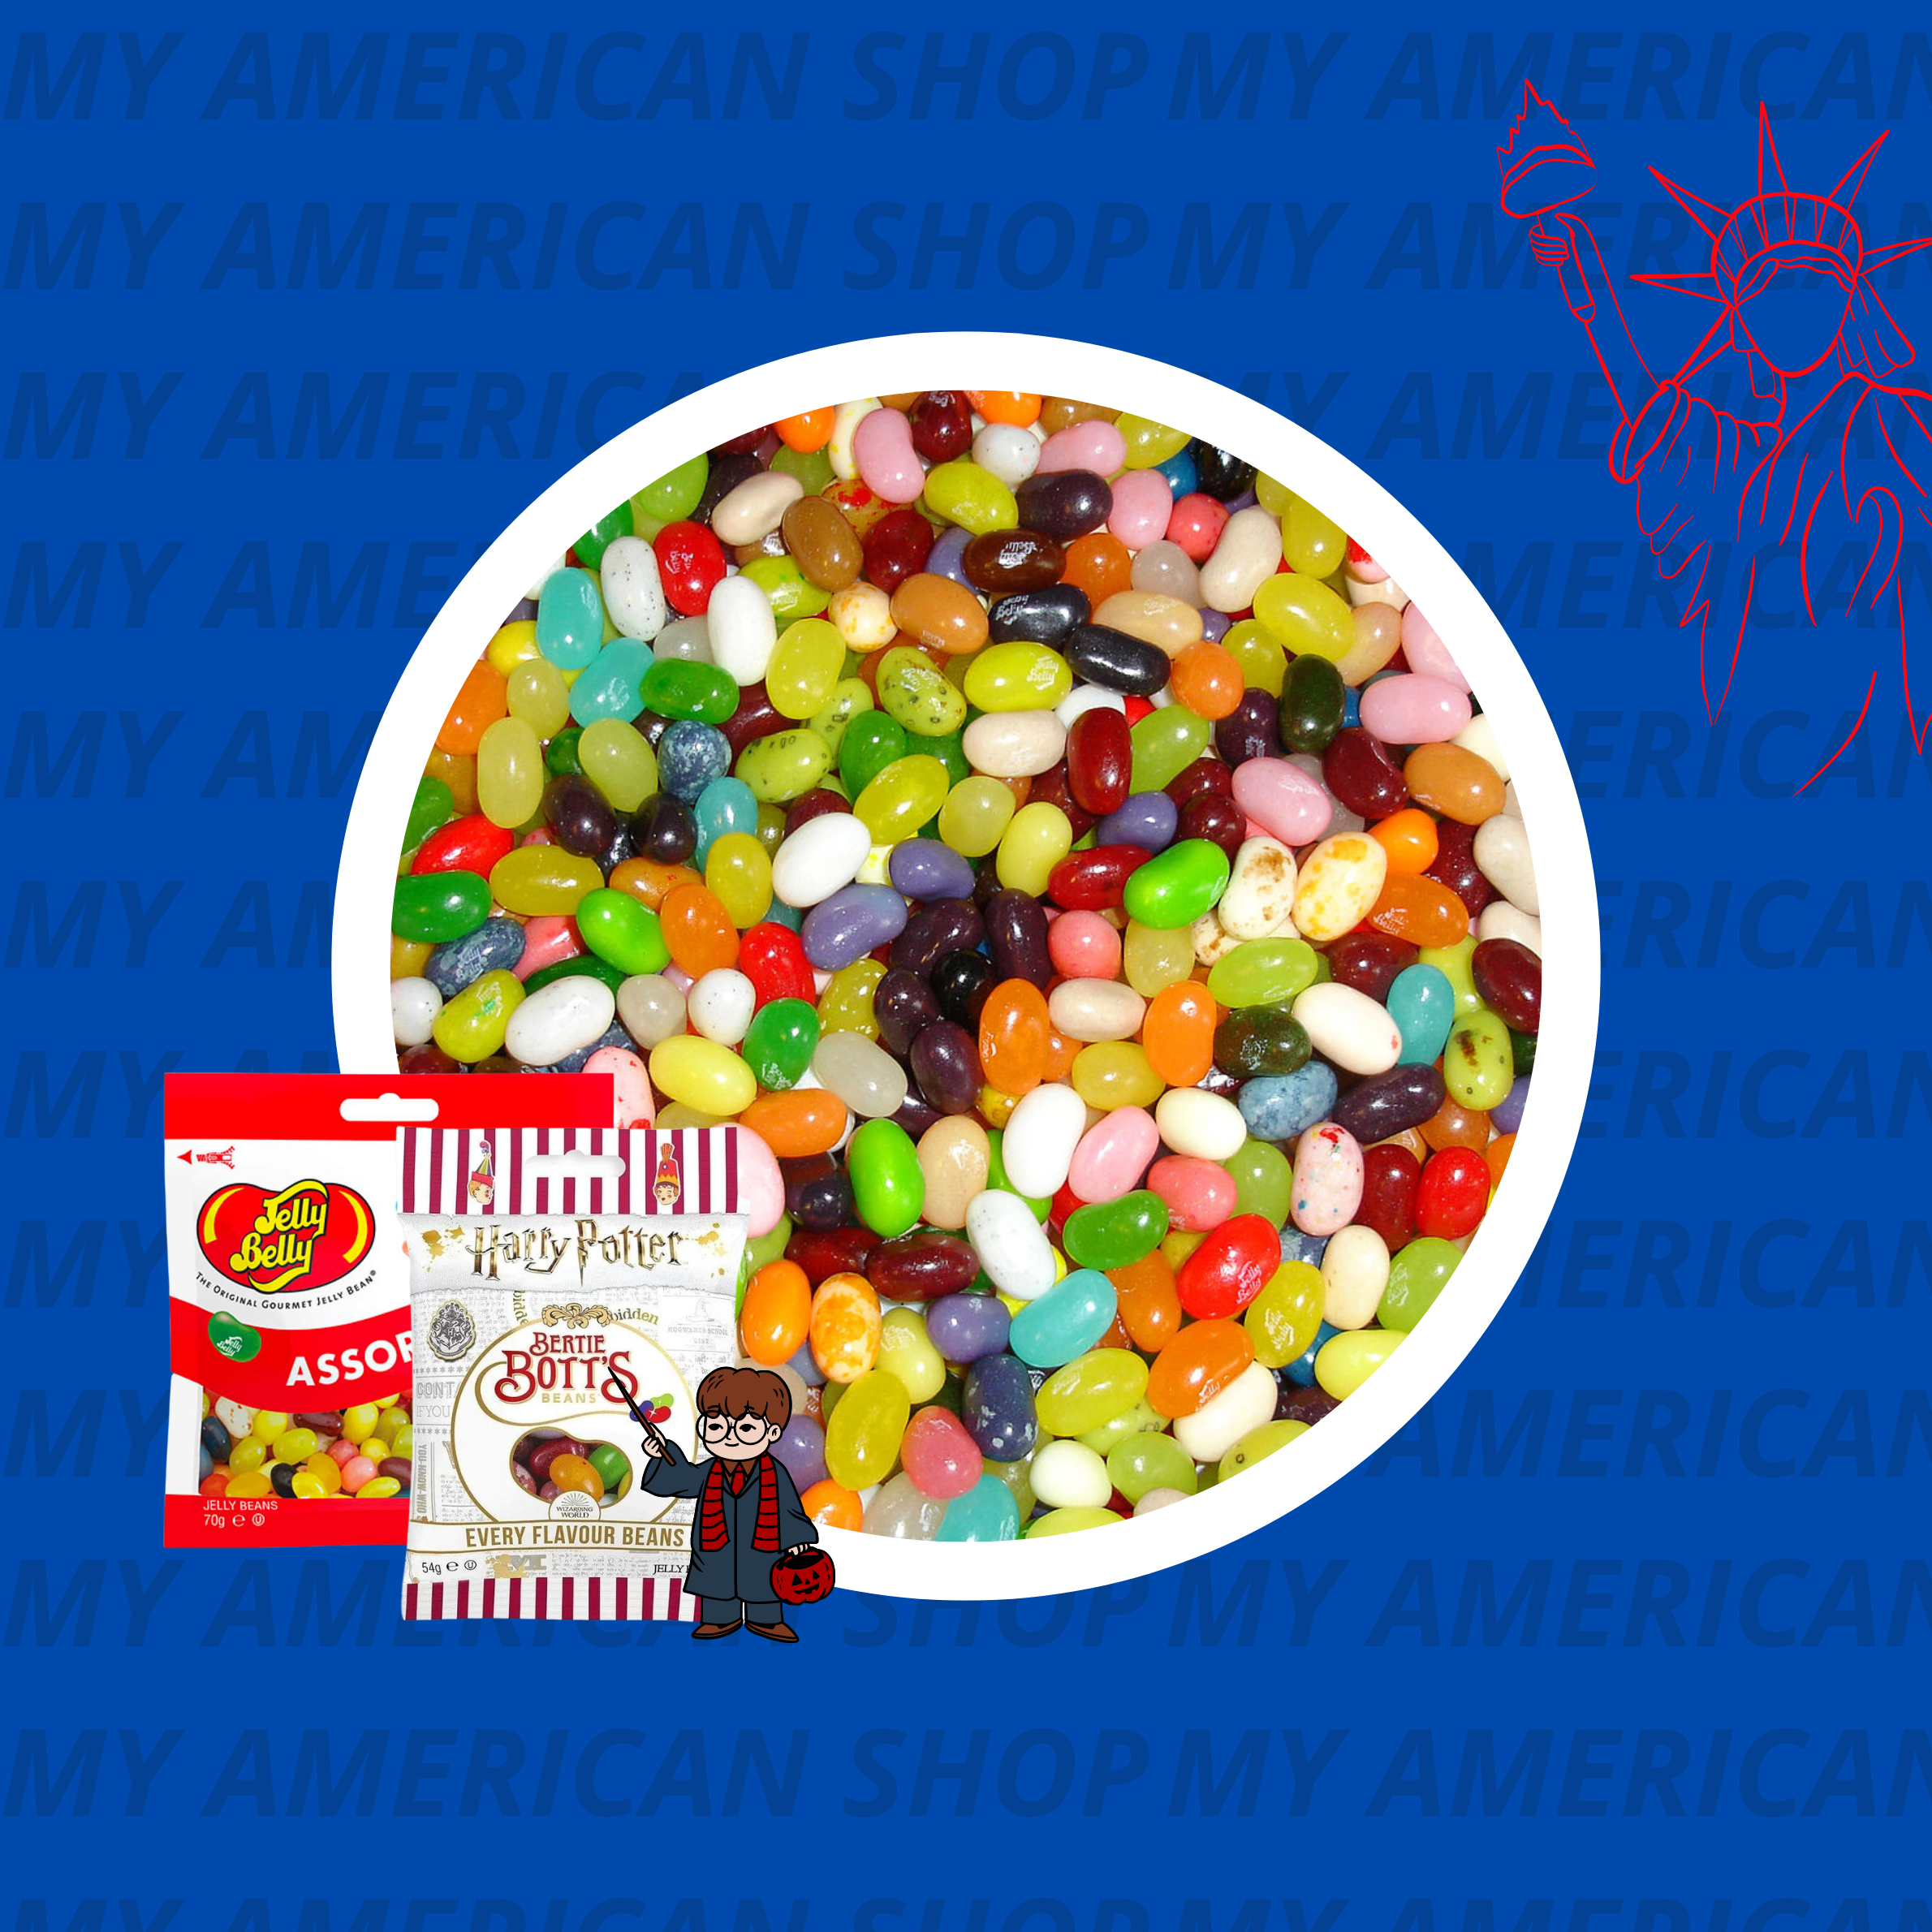 jelly belly - my american shop